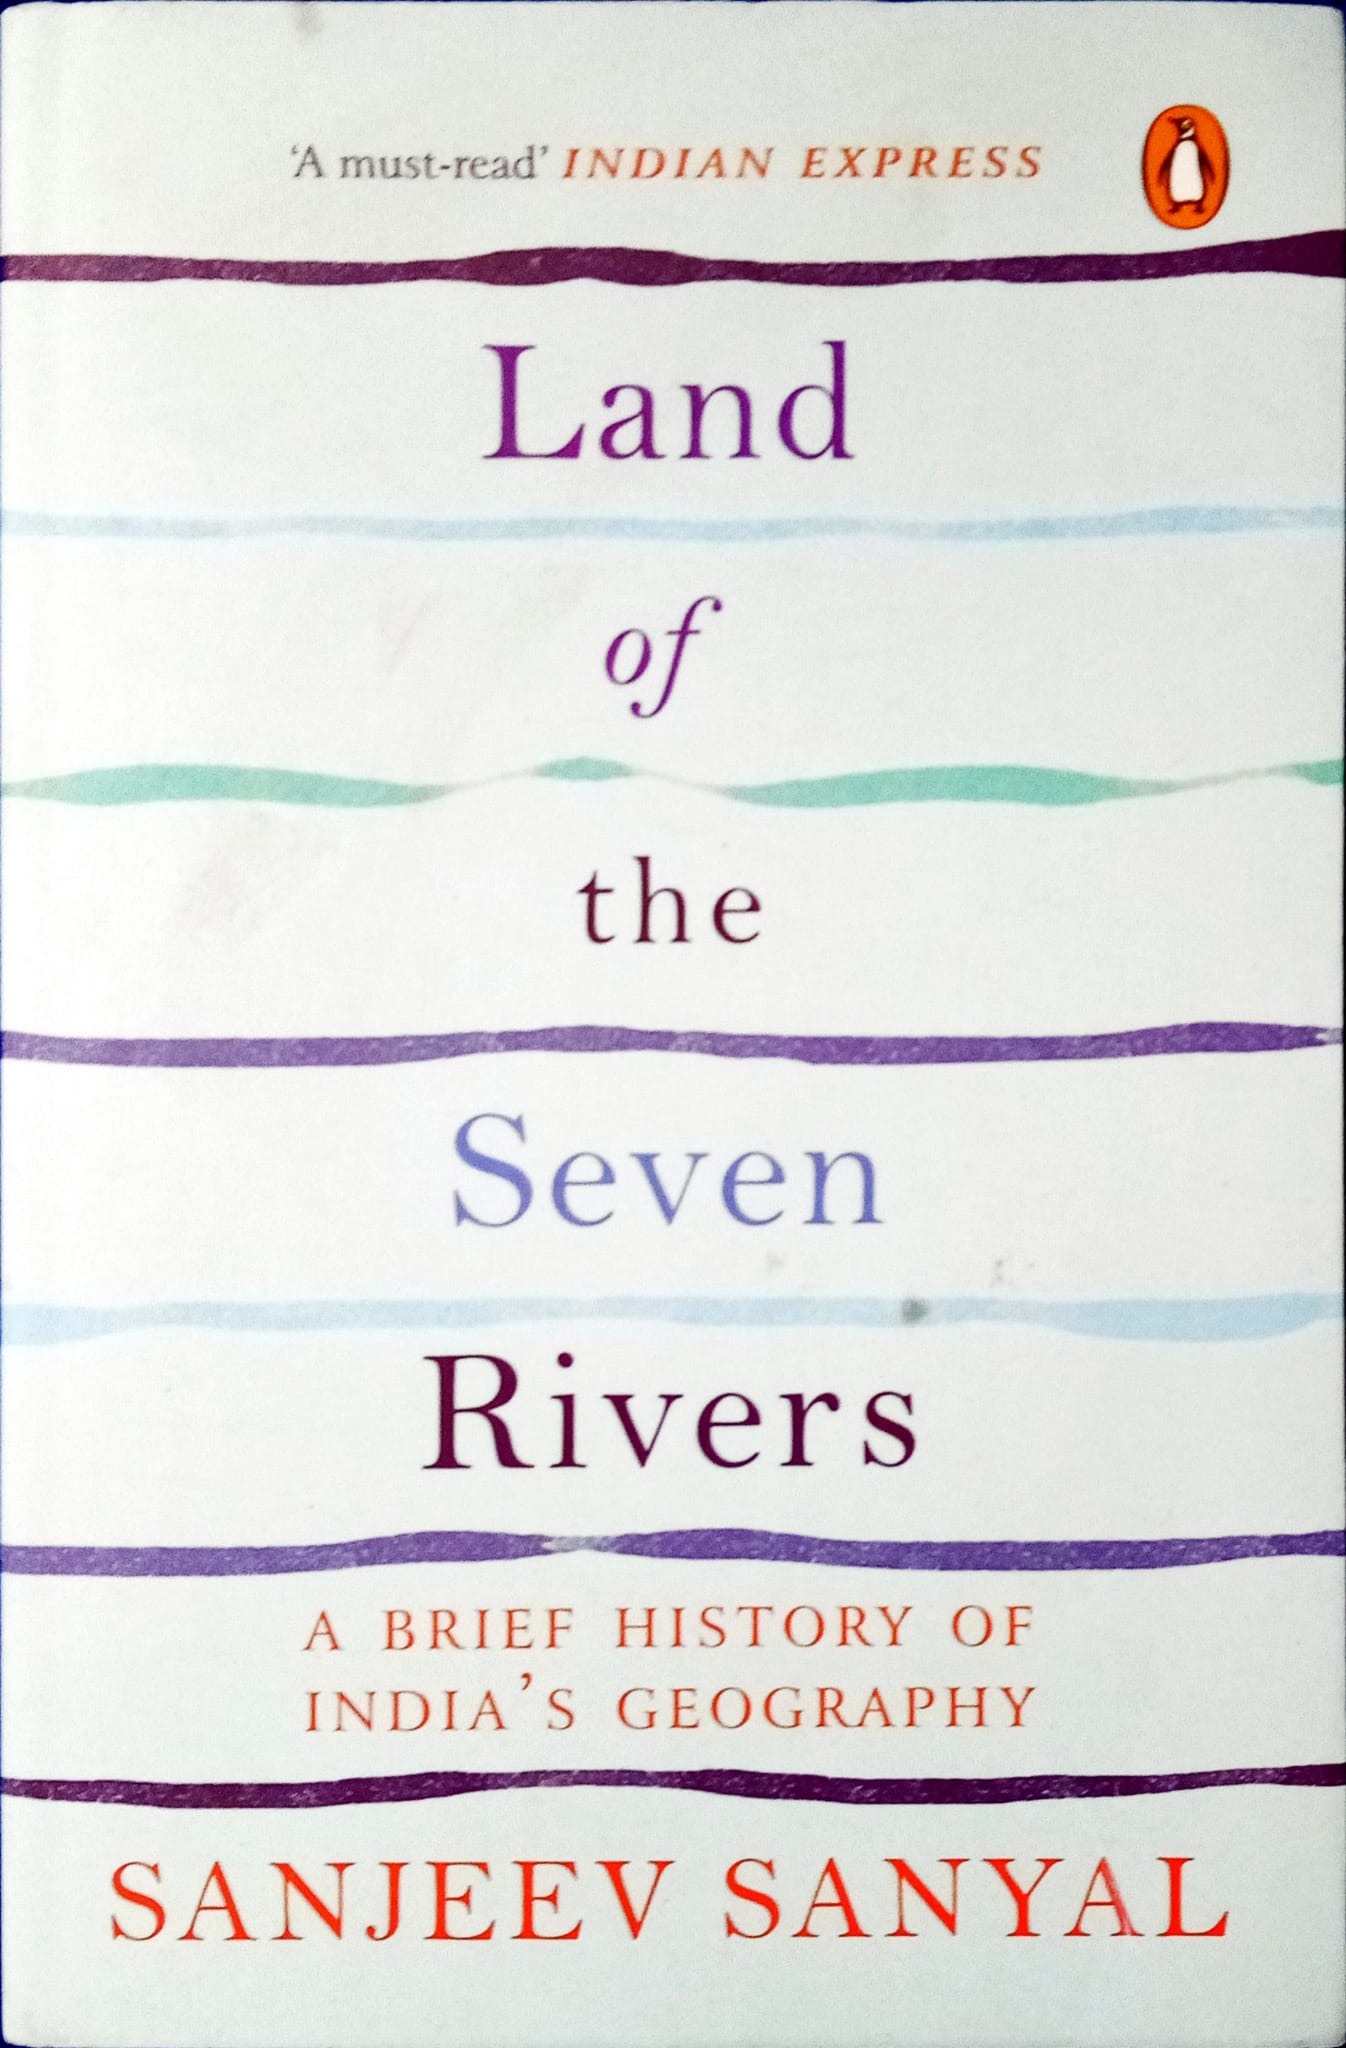 Land of the Seven Rivers - A Brief history of India's Geography